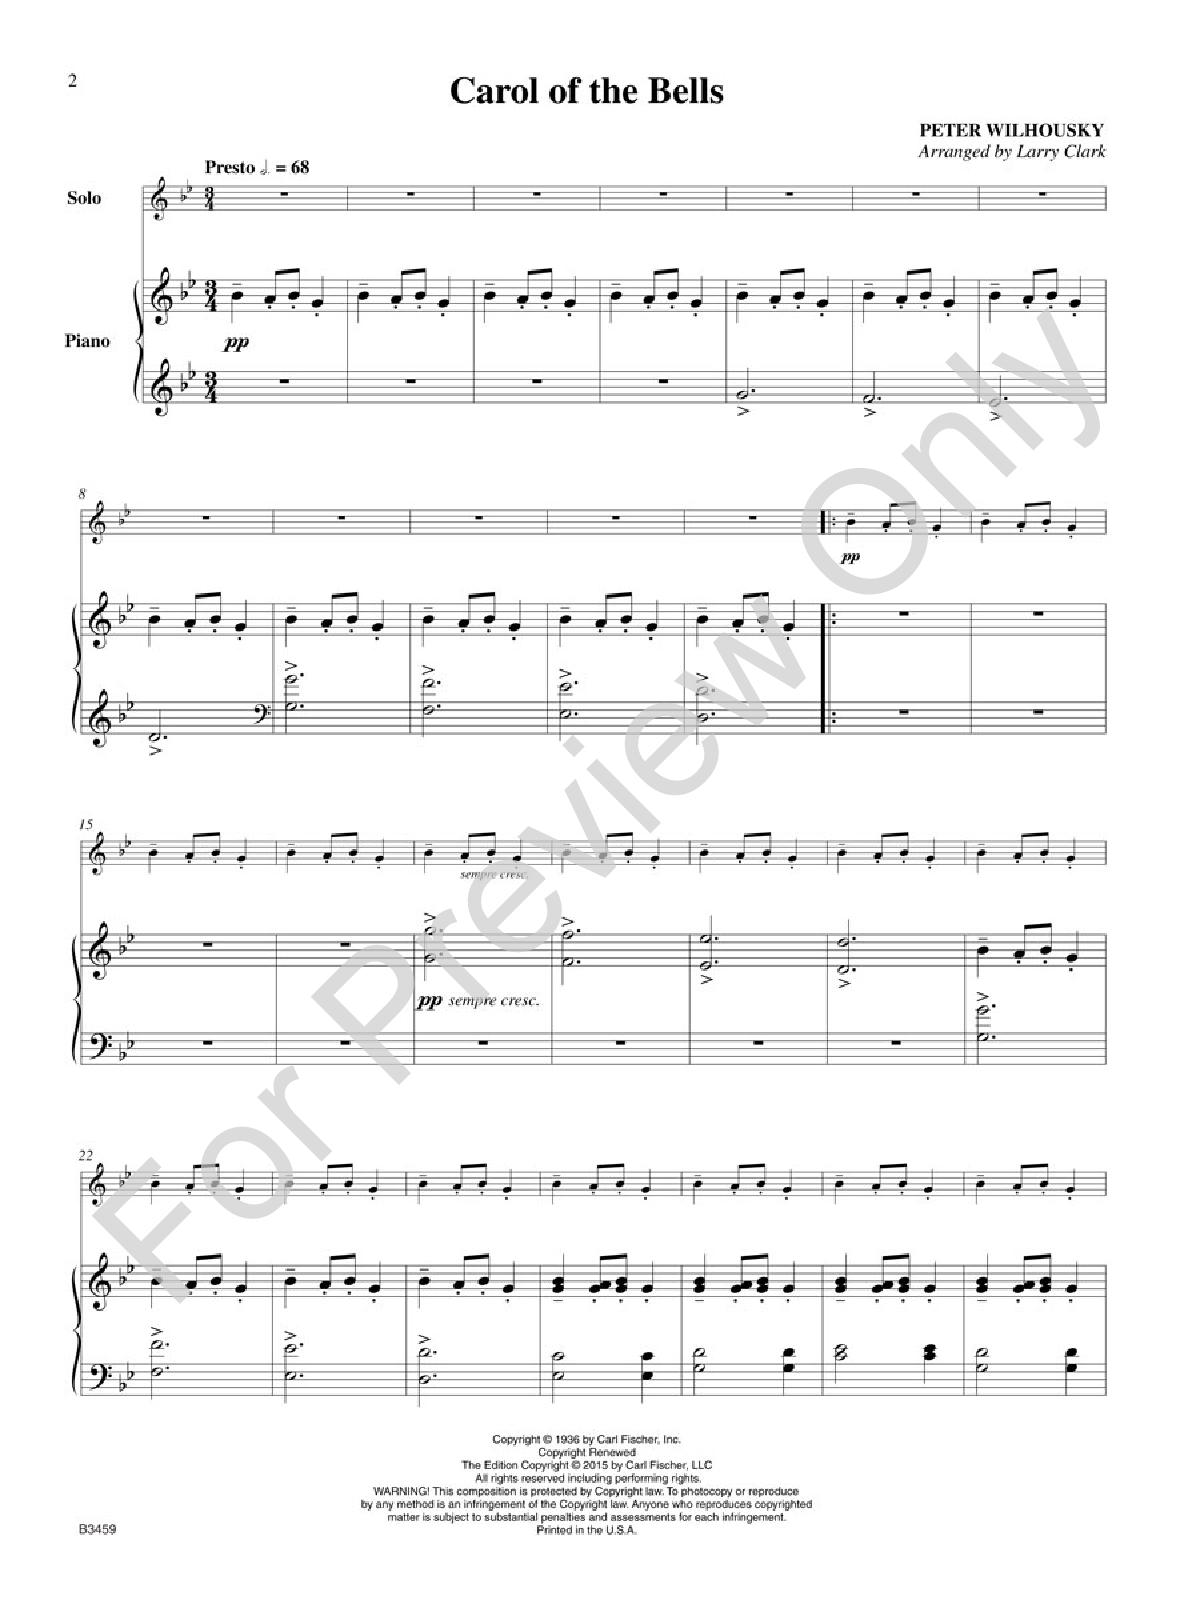 Carol of the Bells String Bass and Piano